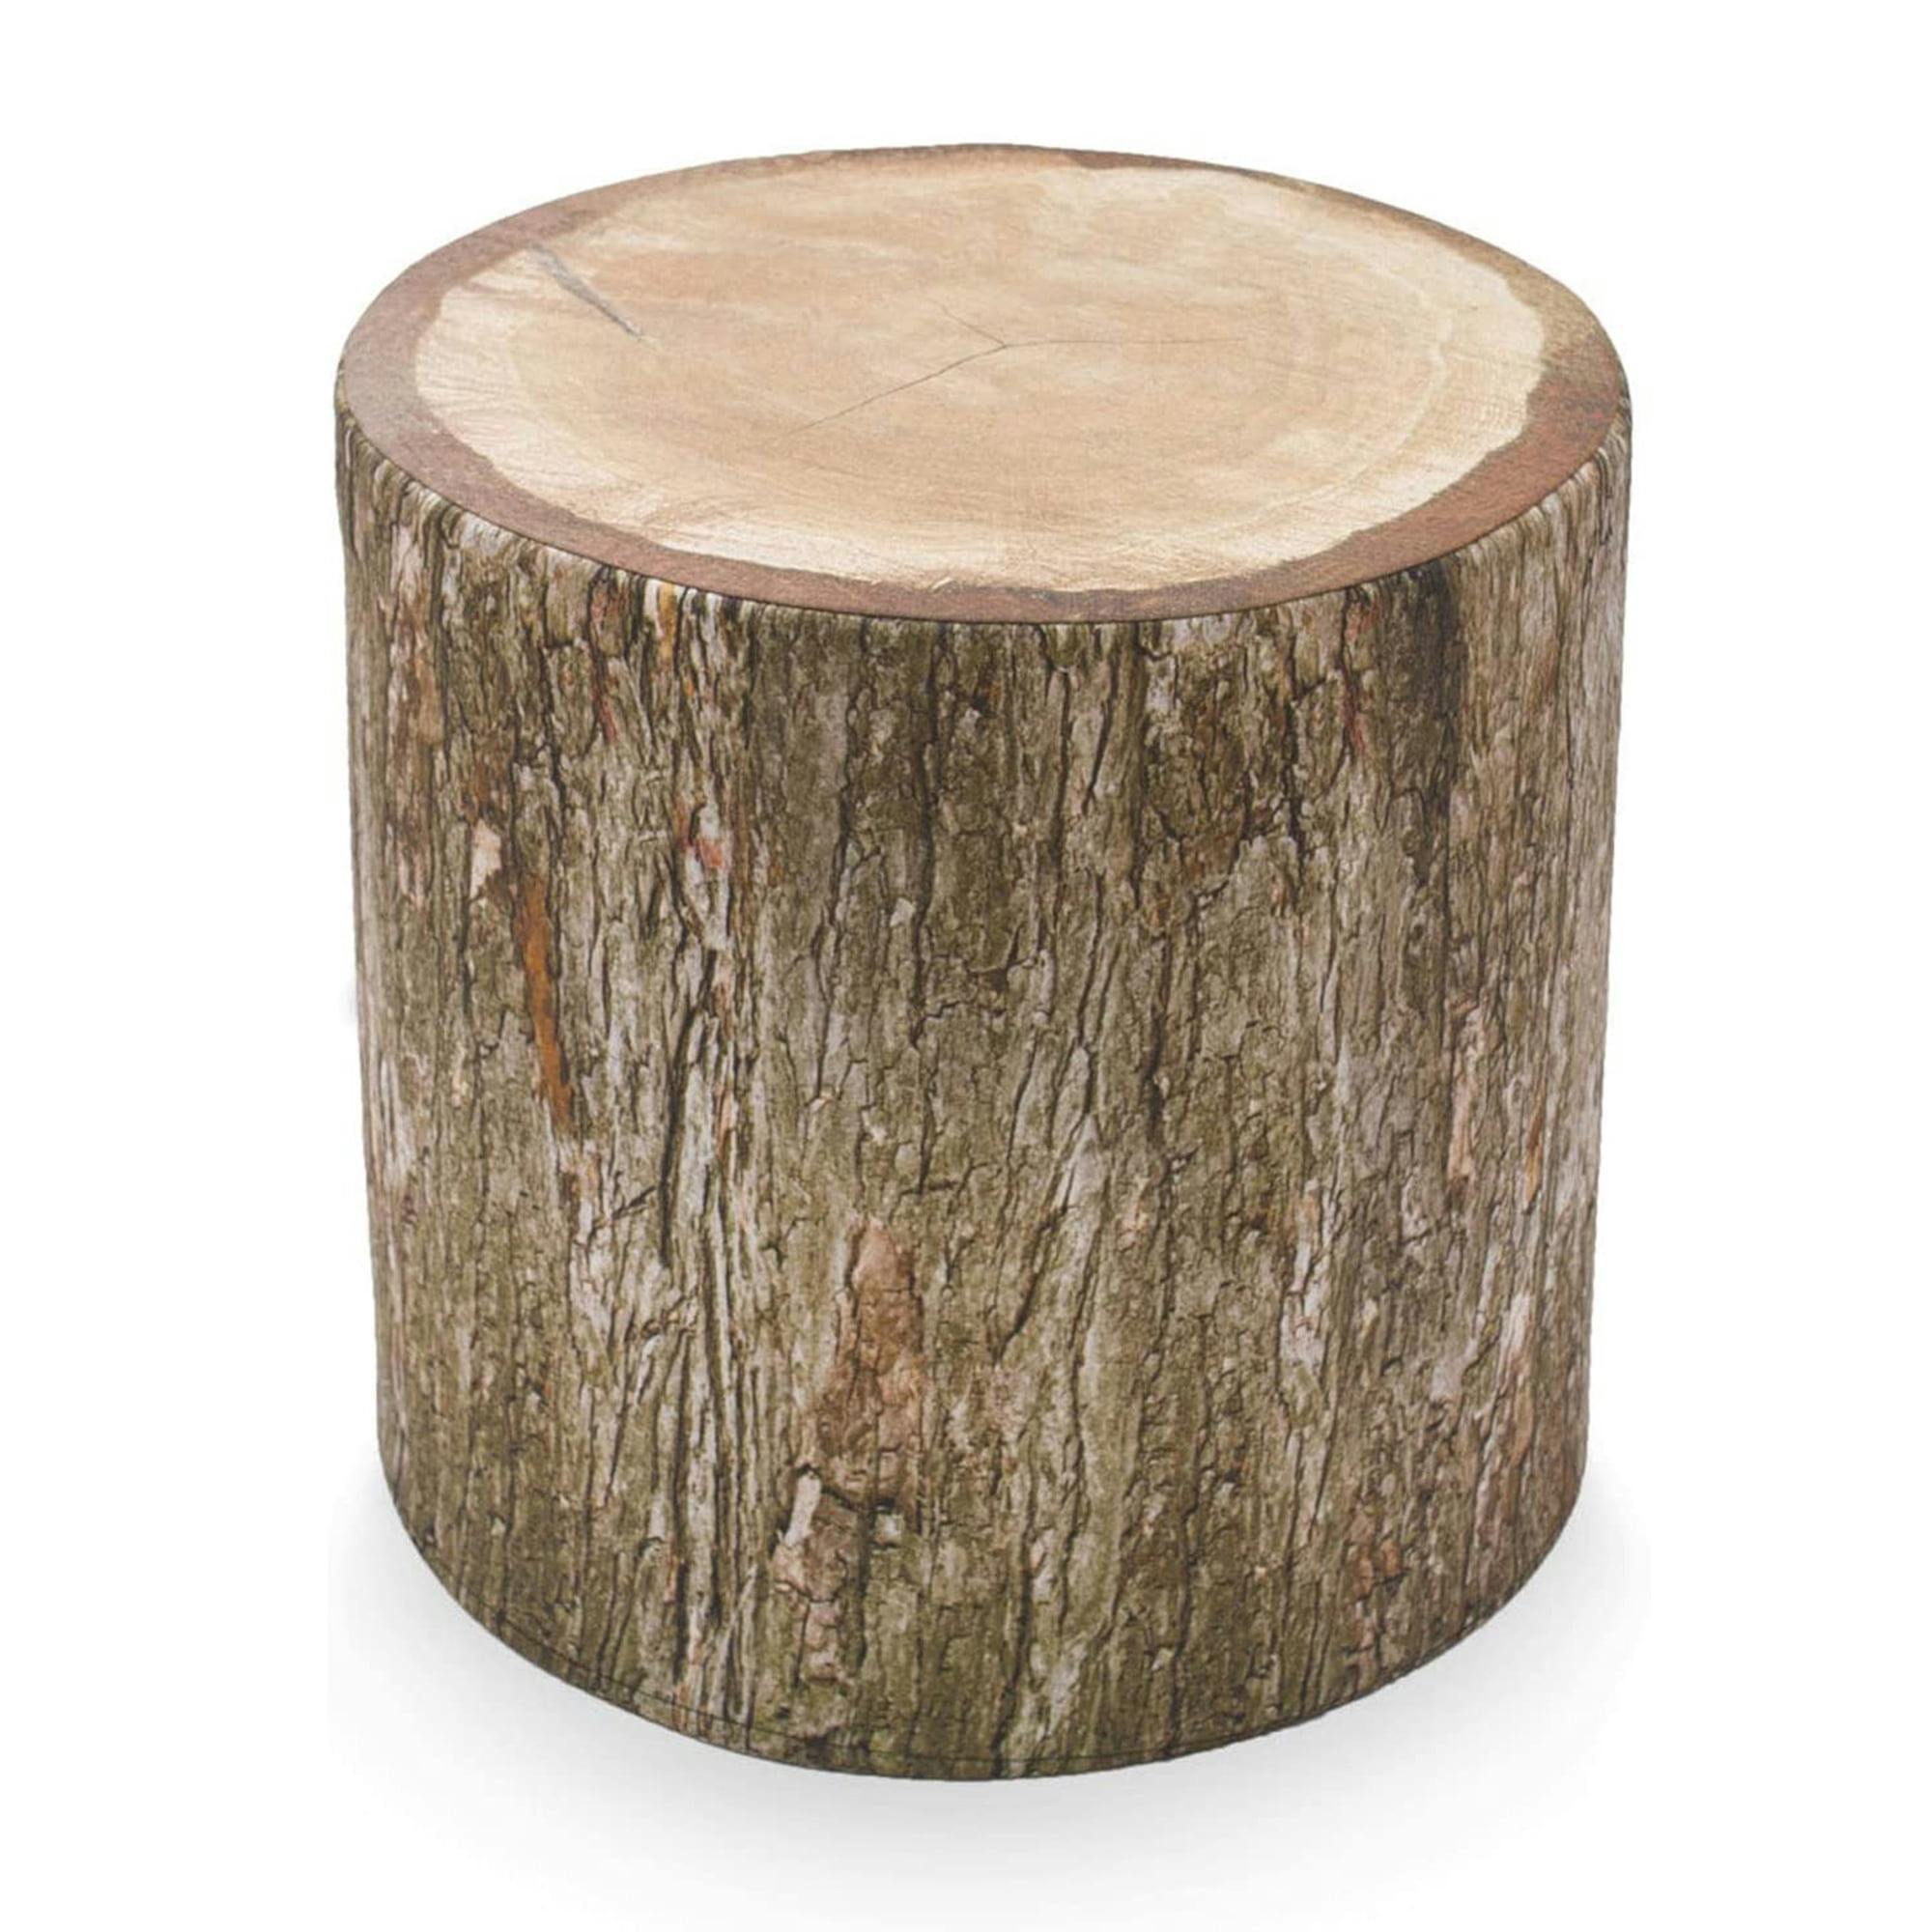 Polished Round Wood-Inspired Outdoor Pouffe Ottoman